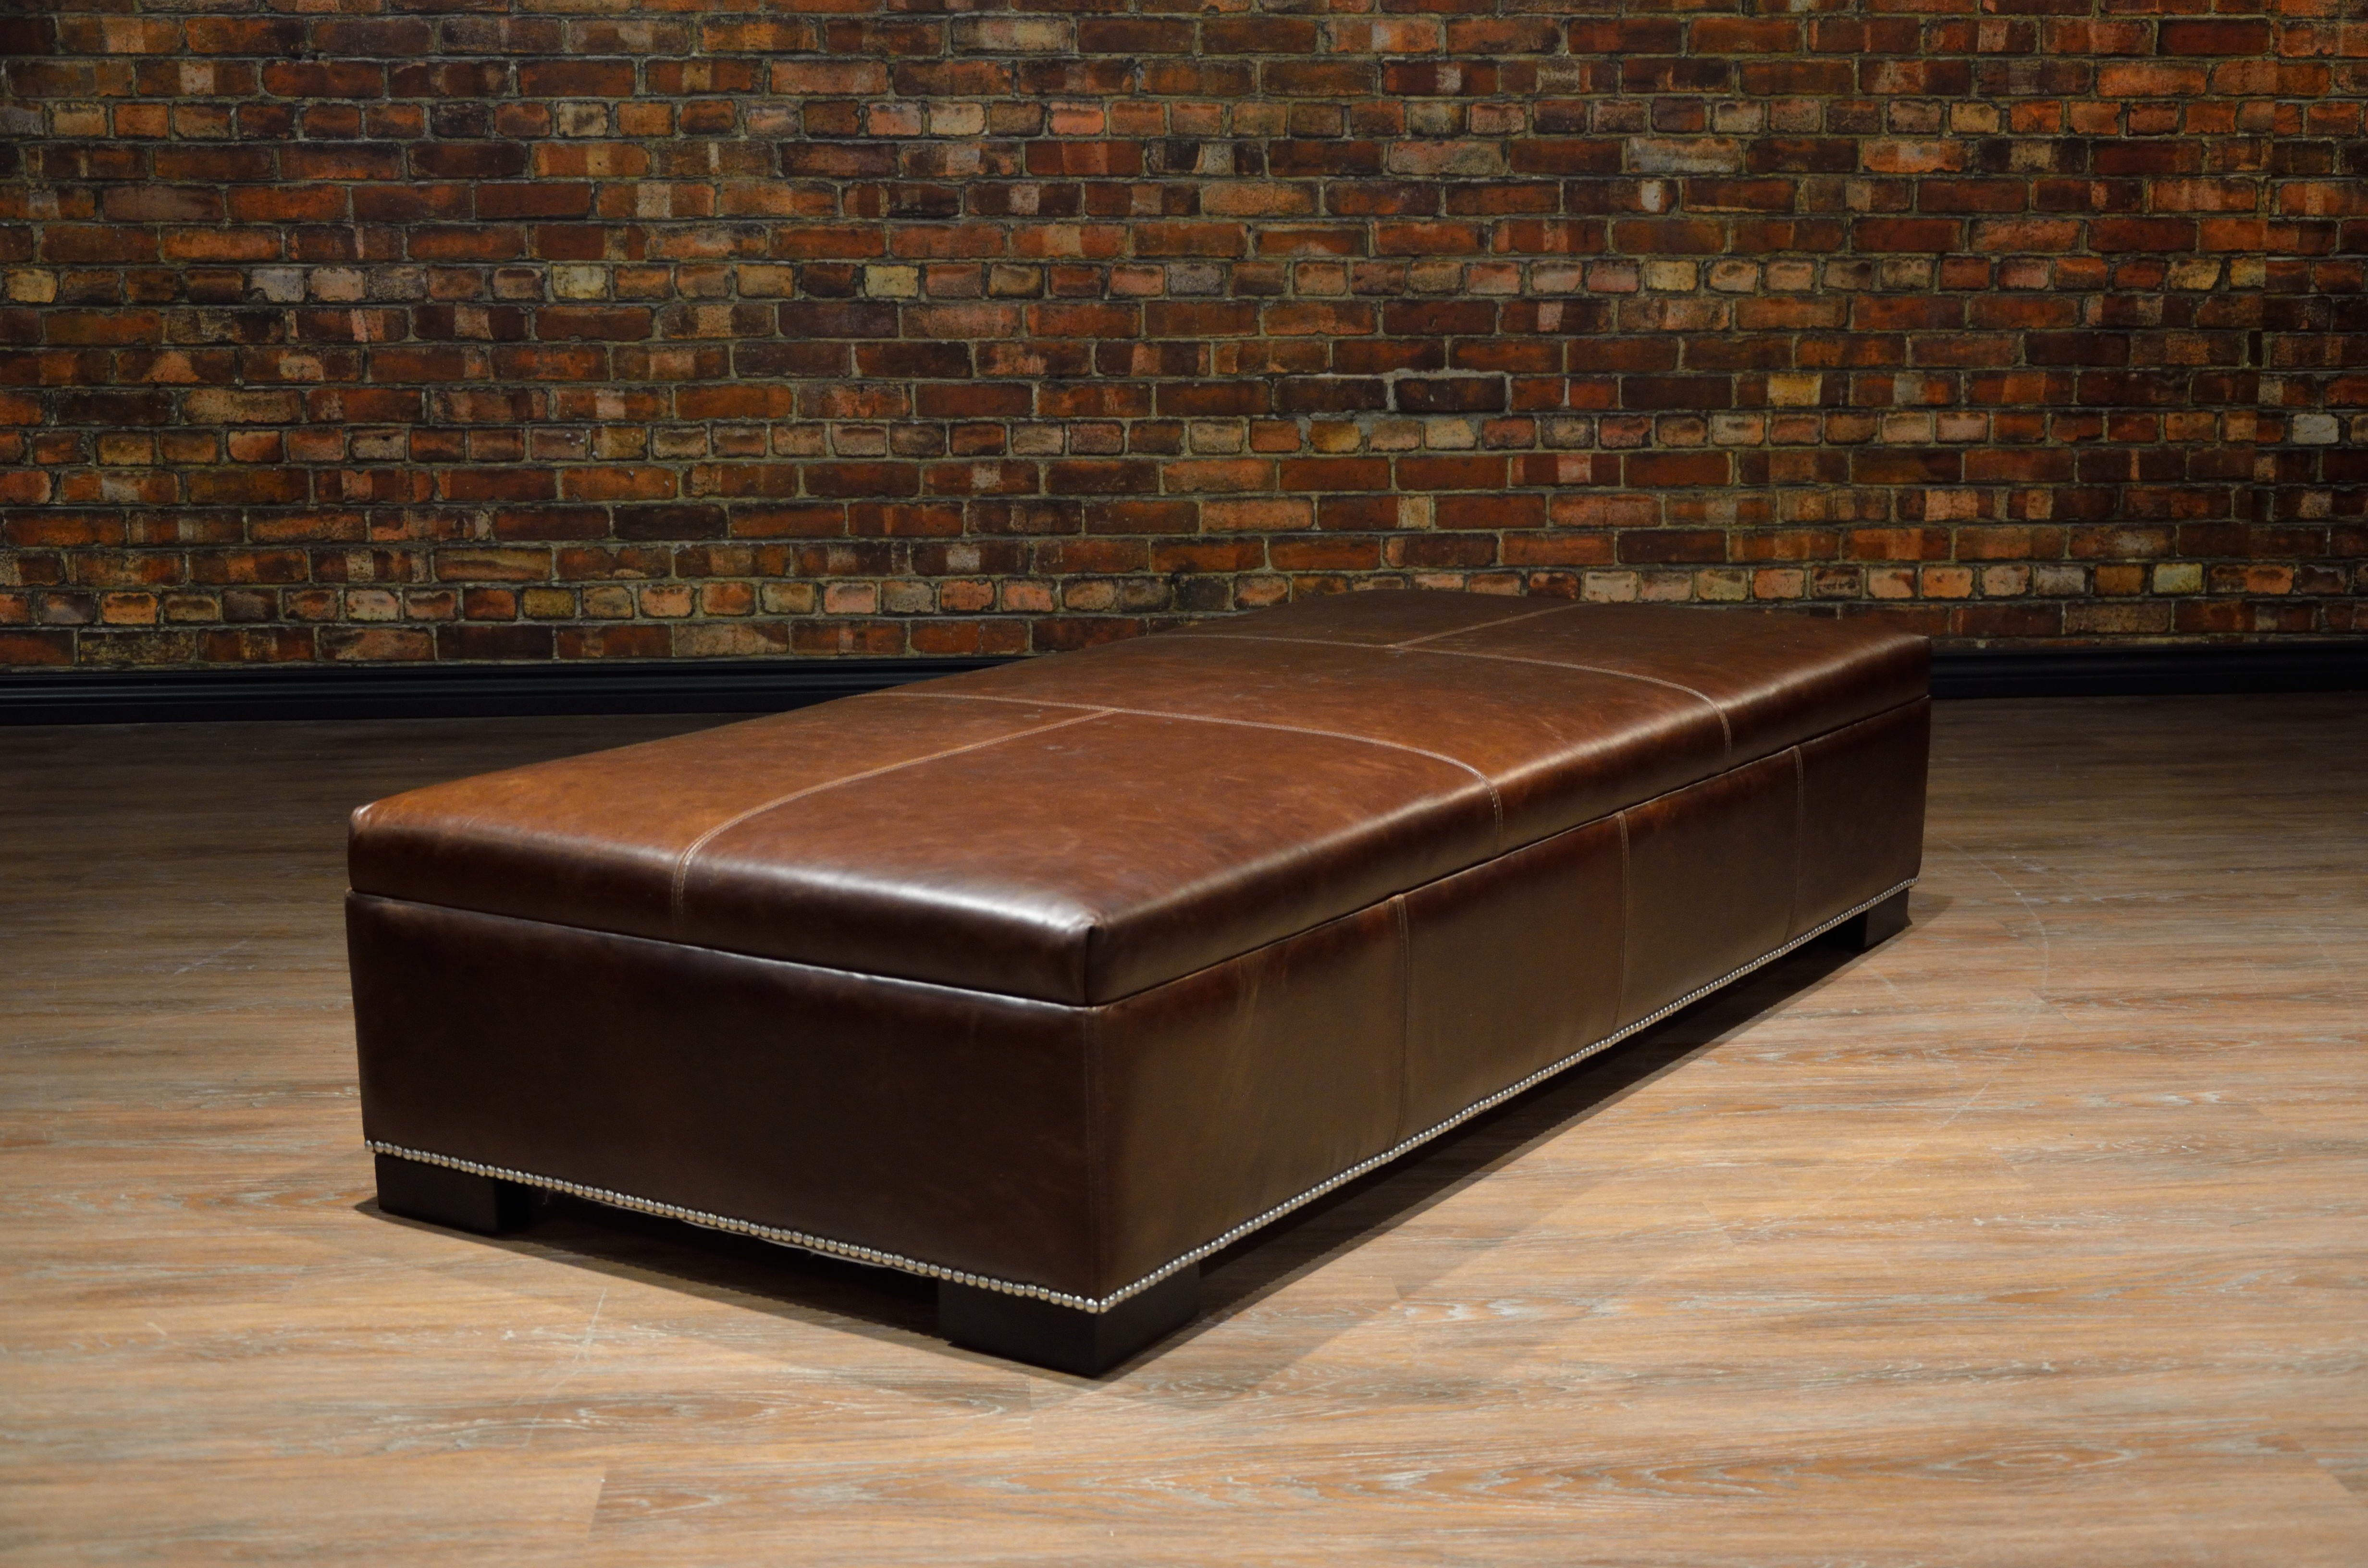 LARGE COFFEE TABLE LEATHER OTTOMAN